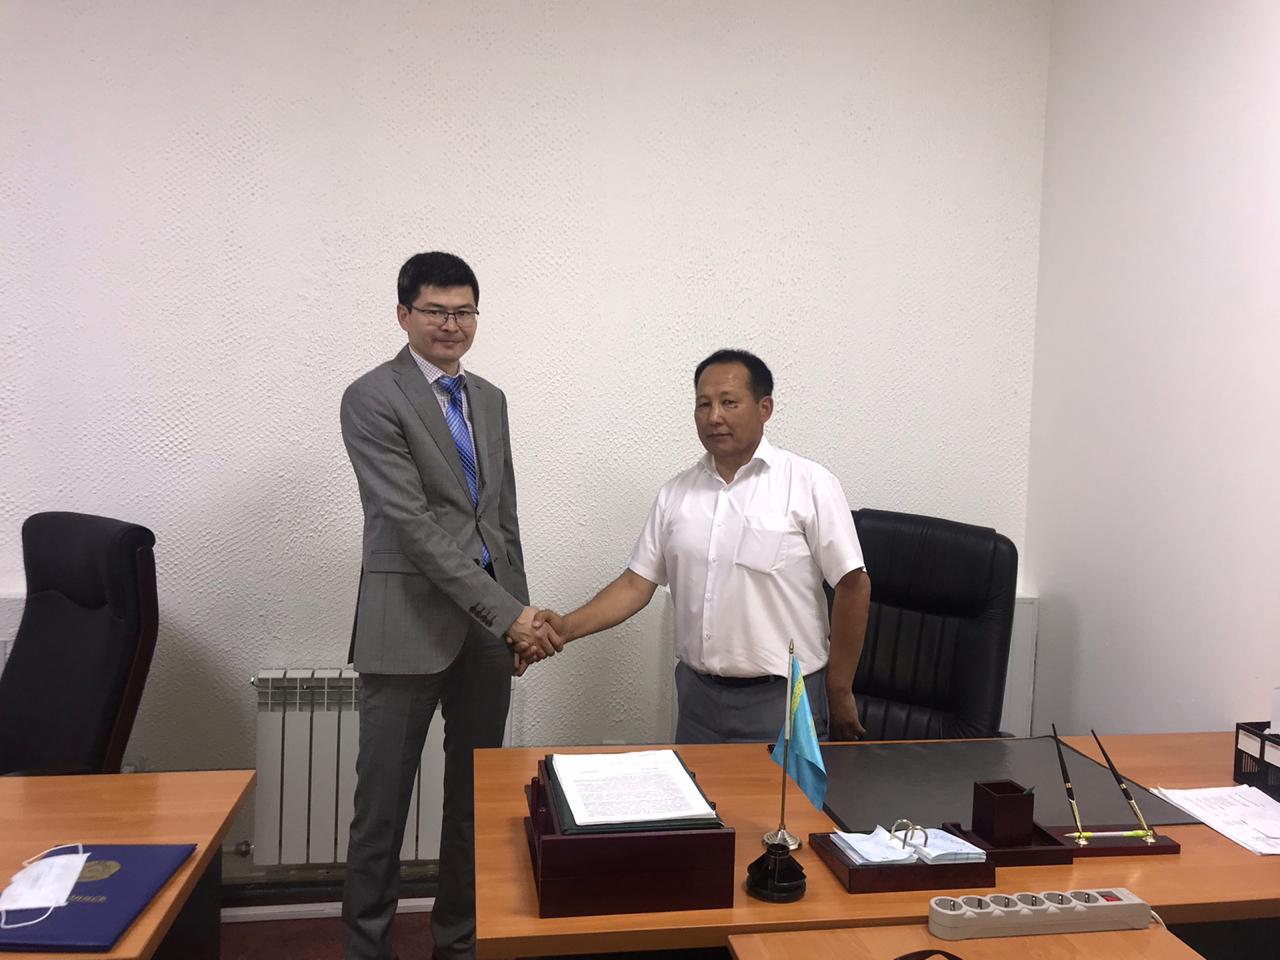 Muratbay Nurmagambetov, Deputy Director for creativity of the Shymkent city House of culture, started working in accordance with the transfer procedure with Marat Orazmetov, Deputy Director for creativity of the Shymkent theater of satire and humor.